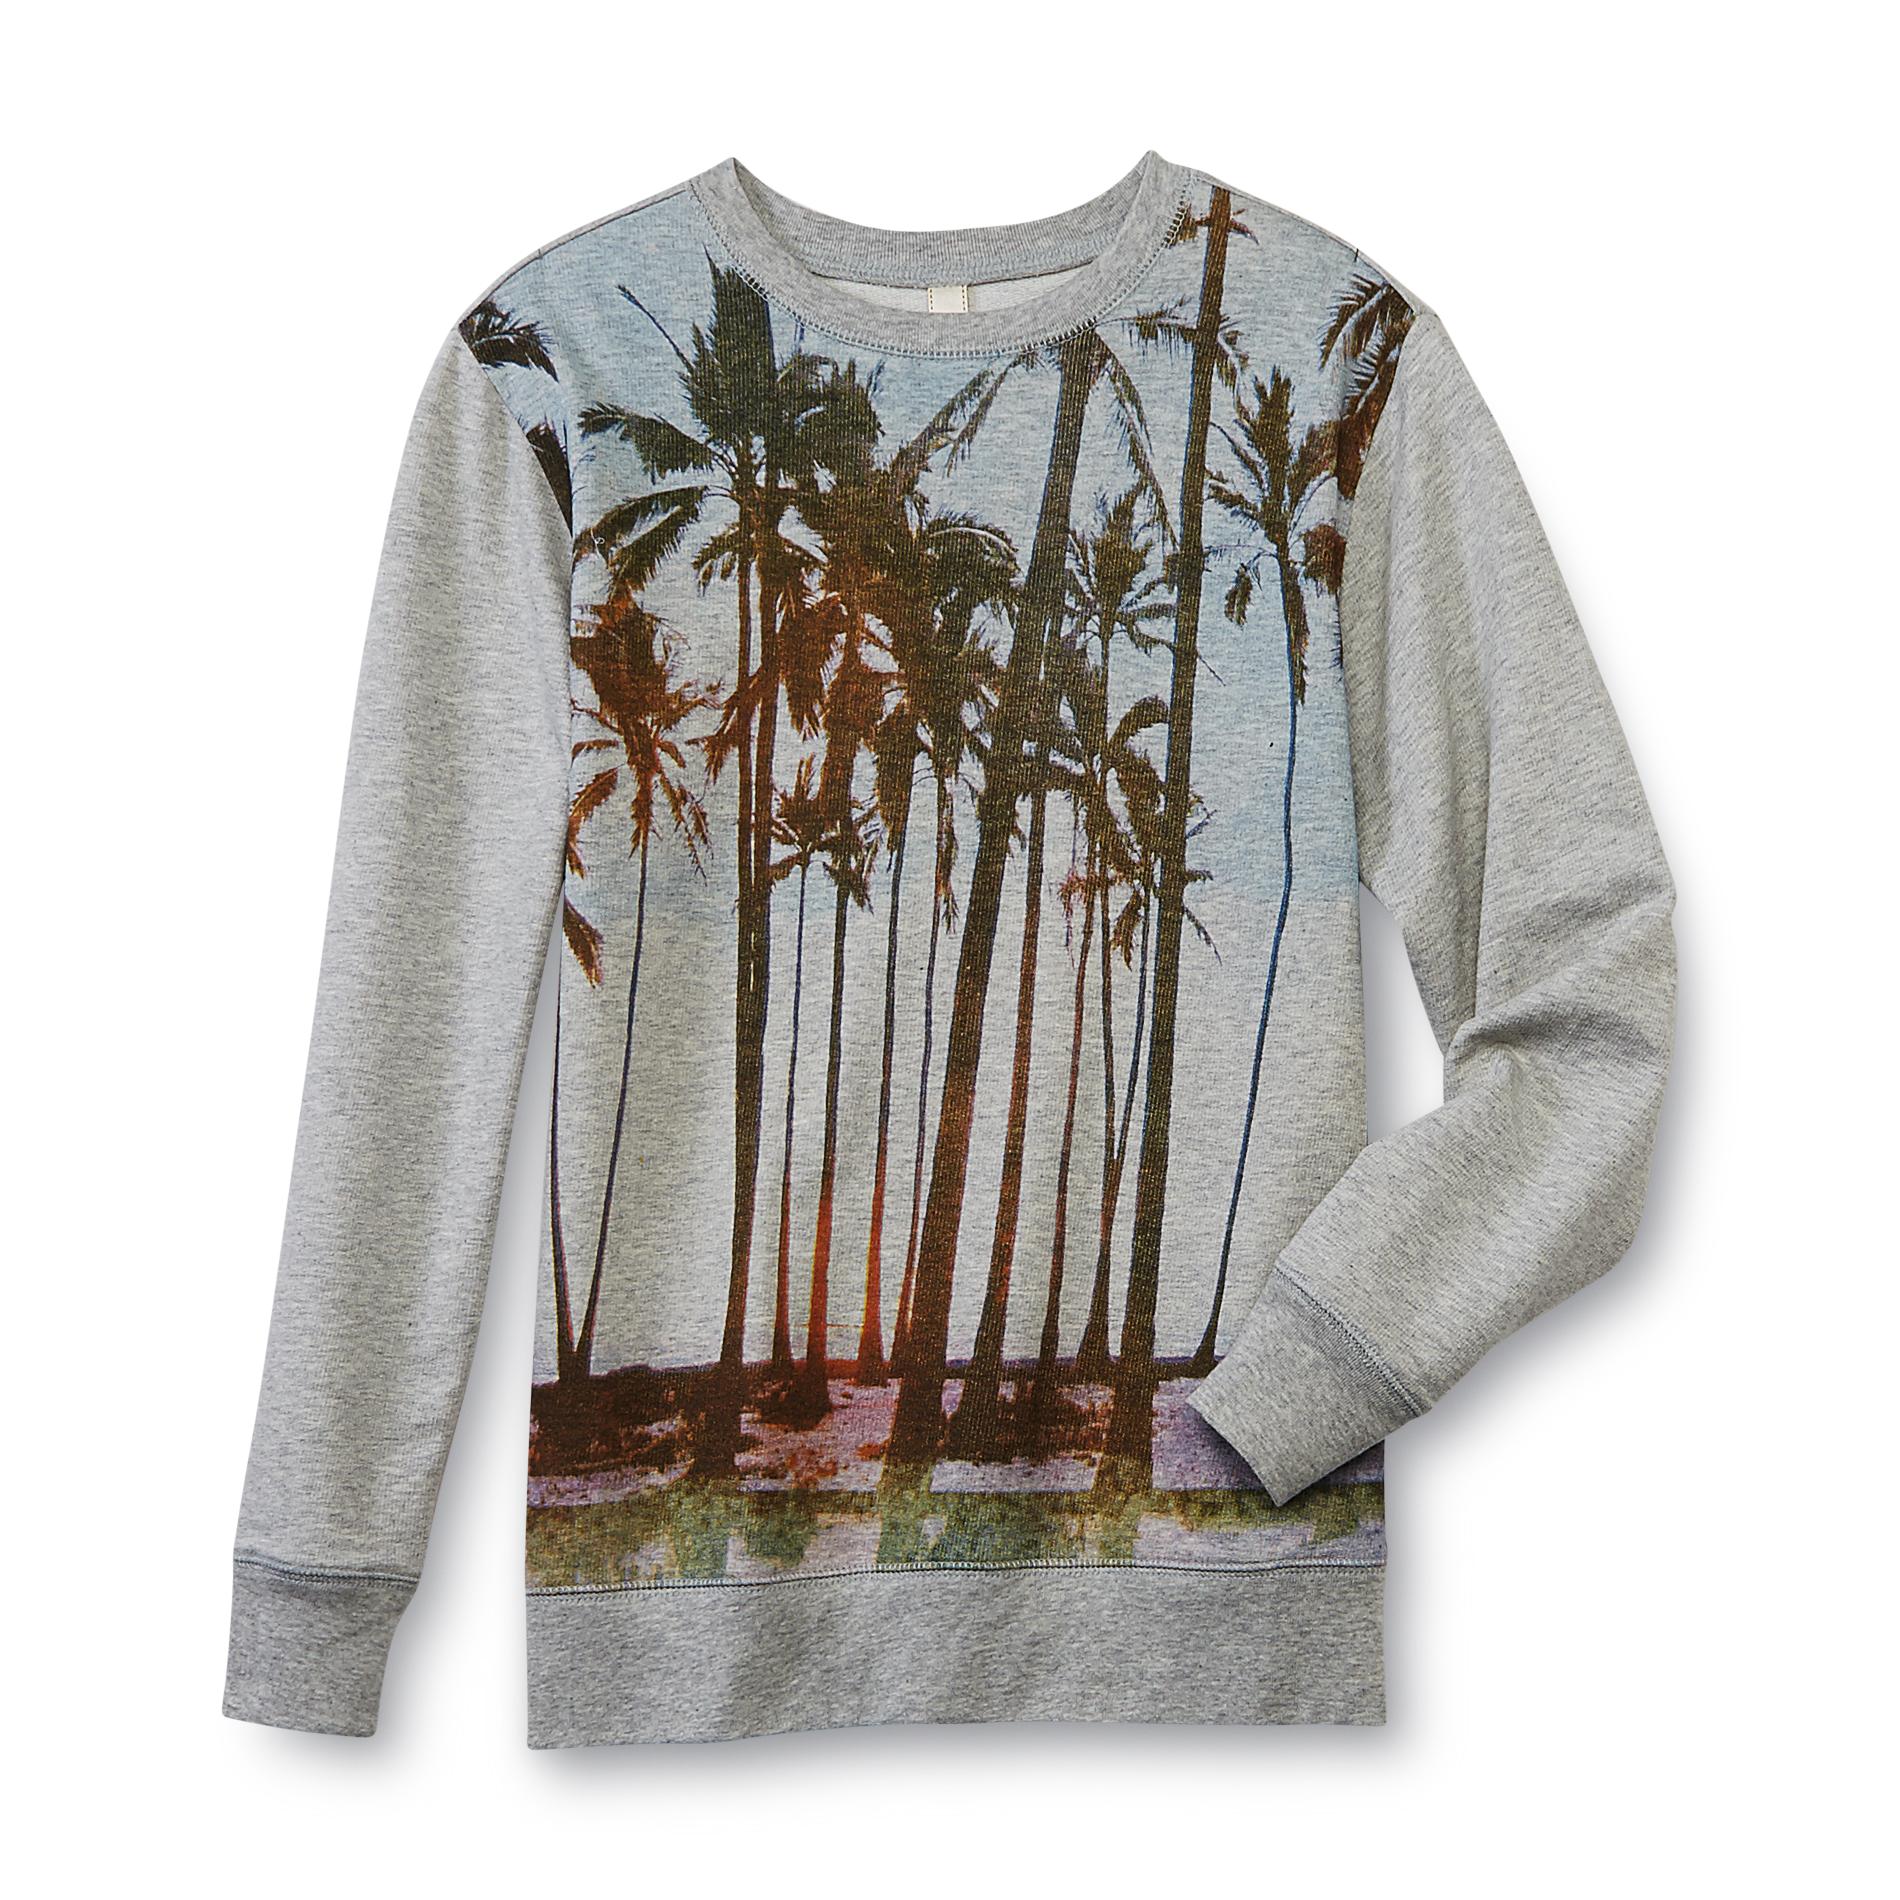 Route 66 Girl's Pullover Sweatshirt - Palm Trees